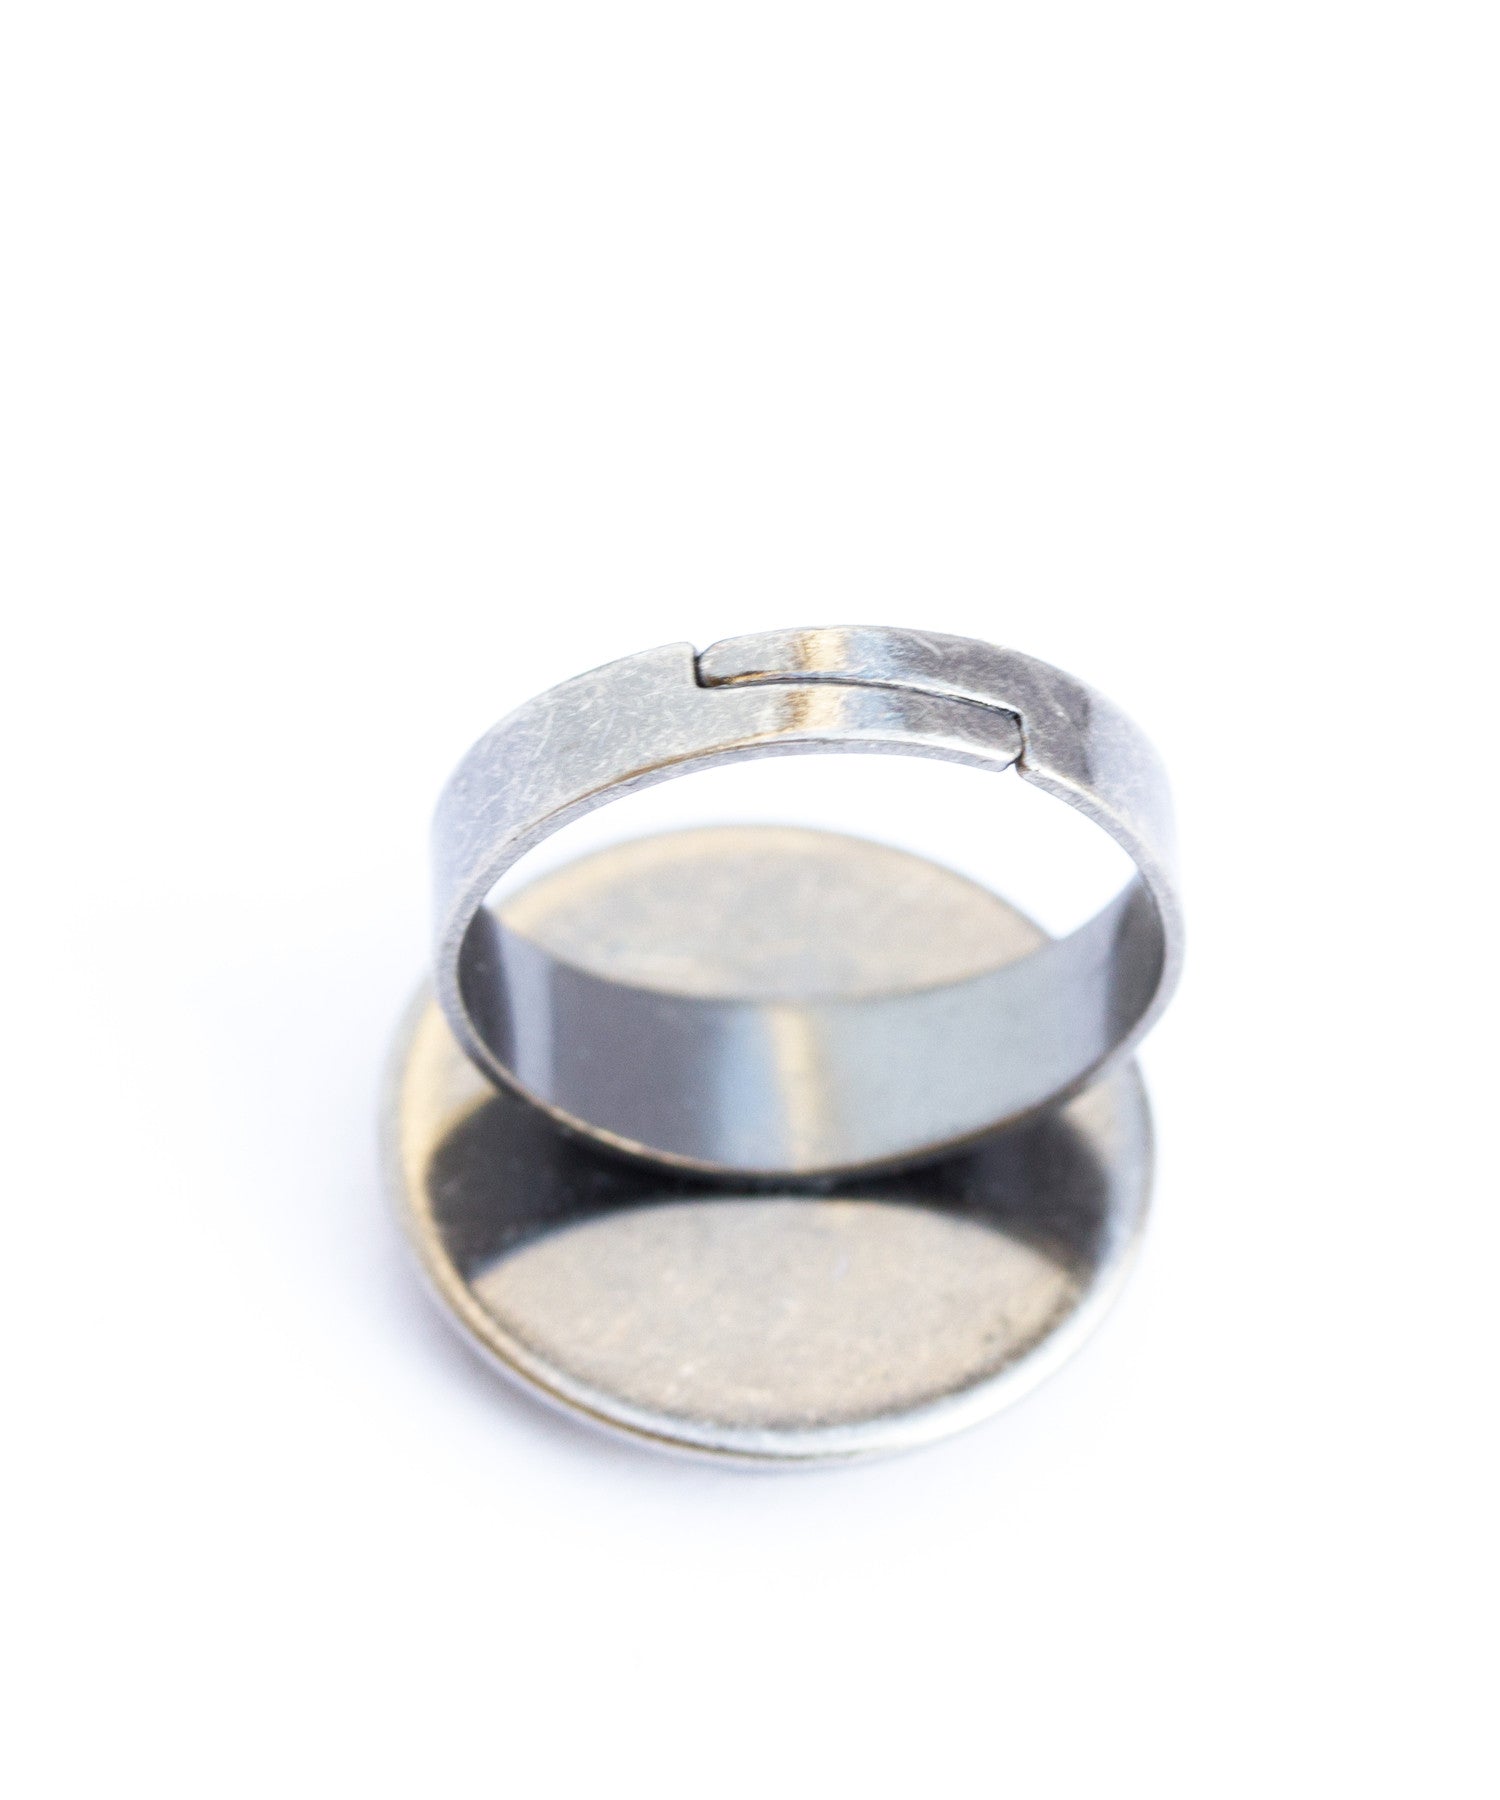 Geeky cocktail round ring